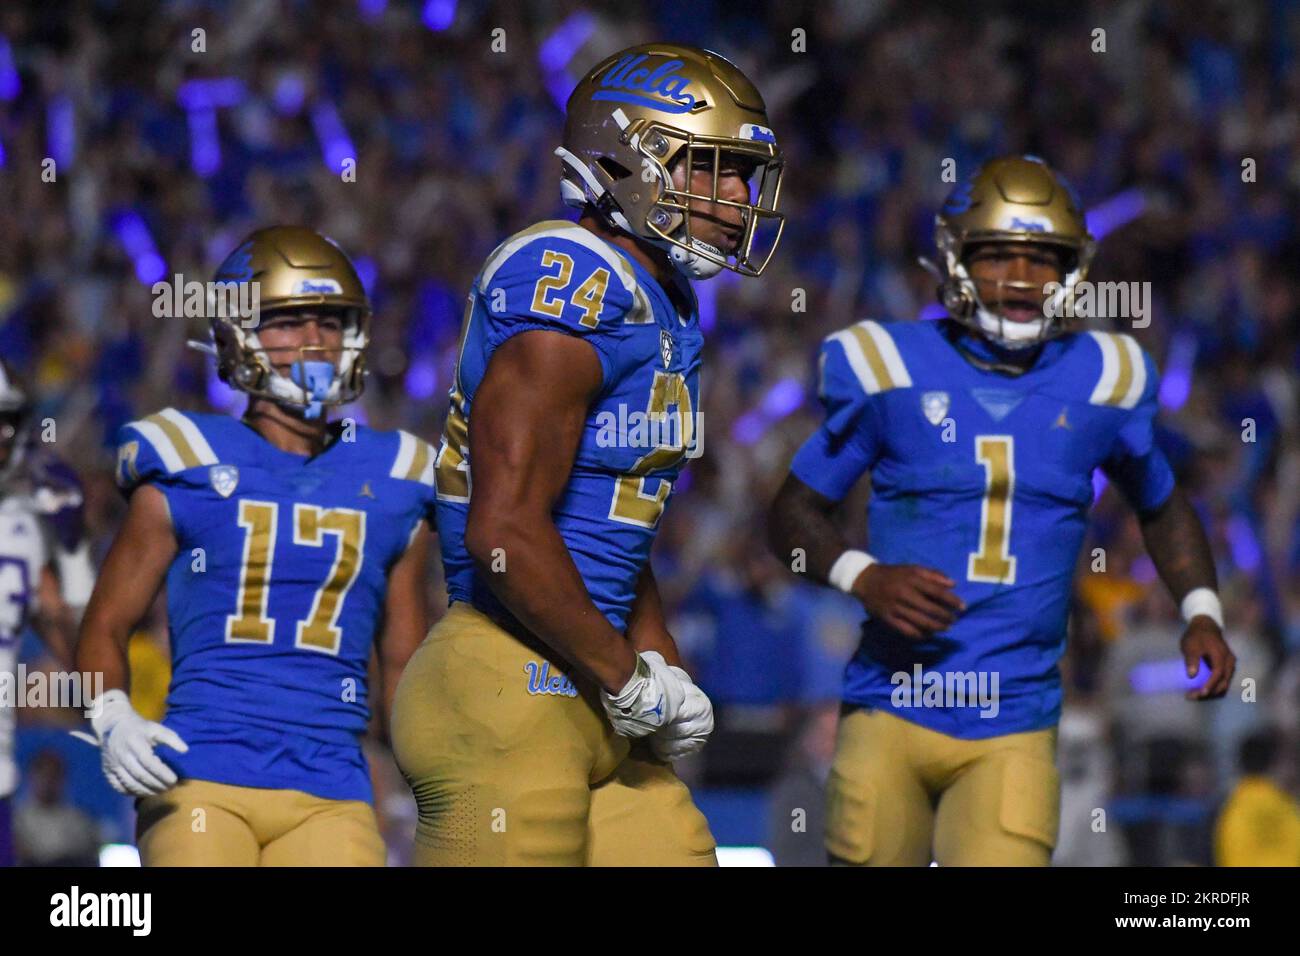 UCLA Bruins running back Zach Charbonnet (24) celebrates after scoring a touchdown during an NCAA football game against the Washington Huskies, Friday Stock Photo